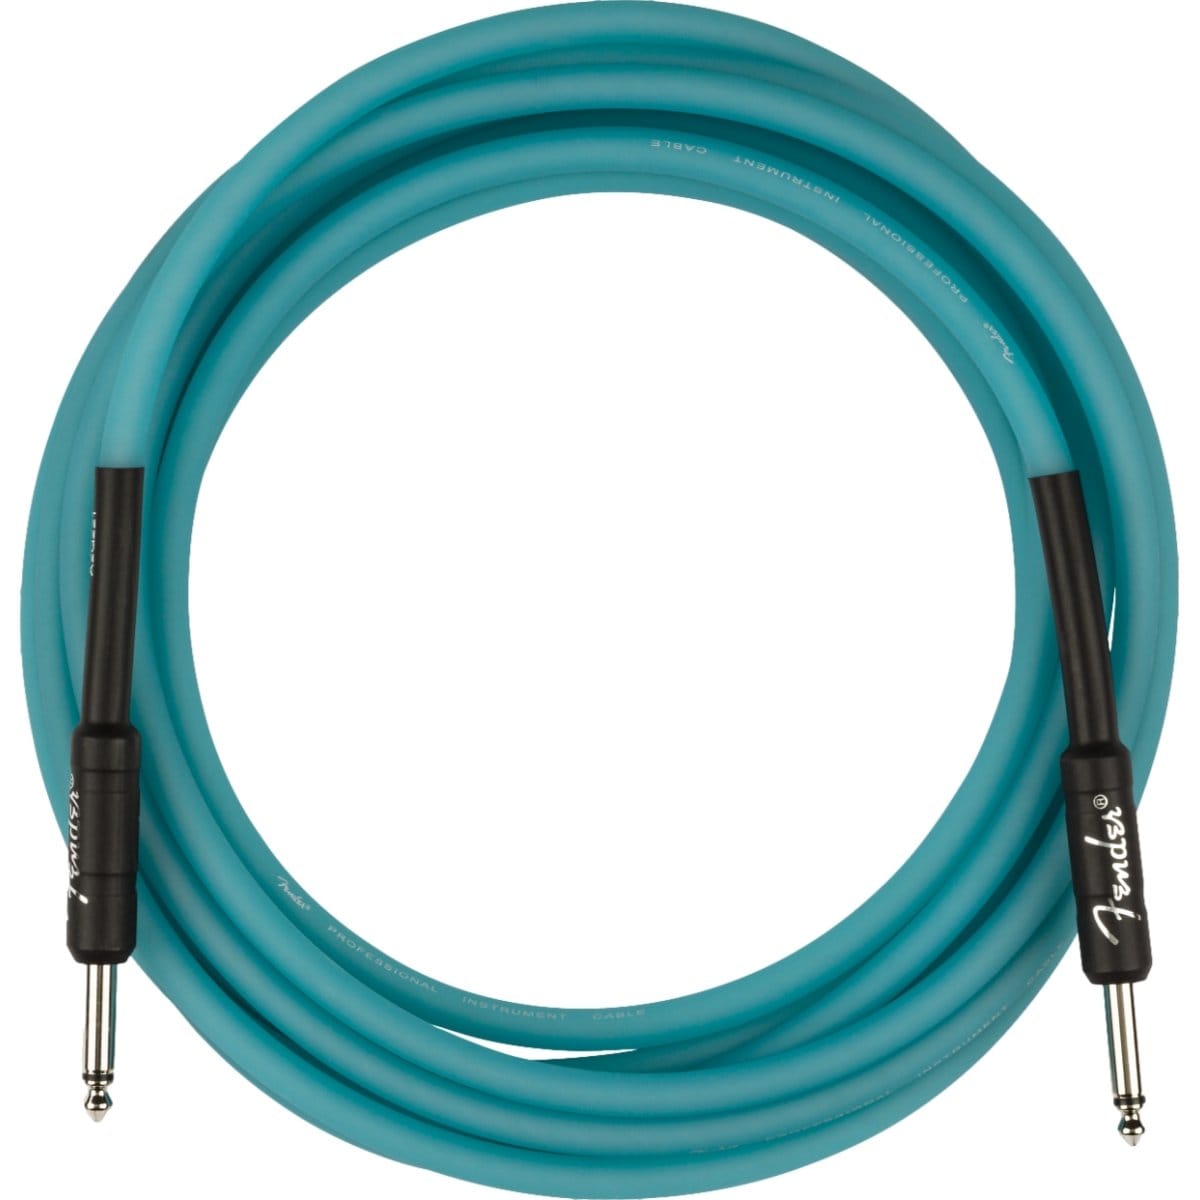 Fender Guitar Accessories Fender Guitar Cable 18.6FT Glow in the Dark Blue - Byron Music